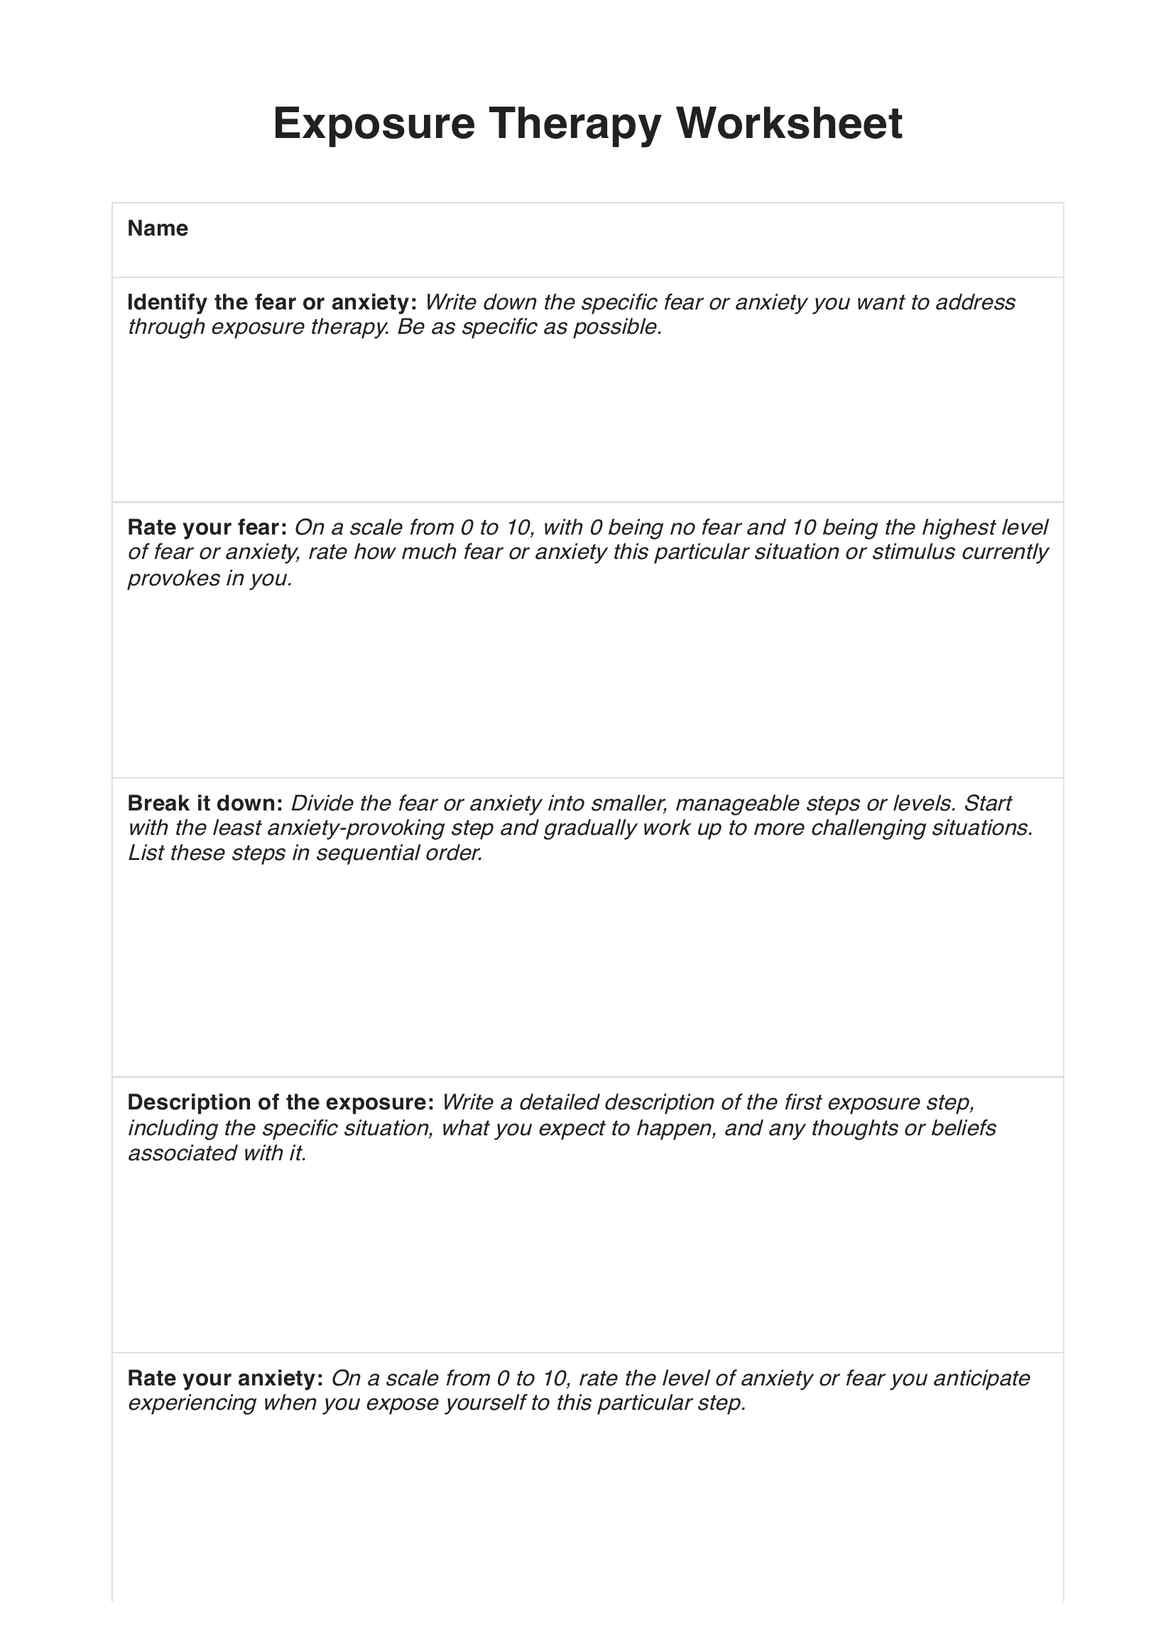 Exposure Therapy Worksheets PDF Example